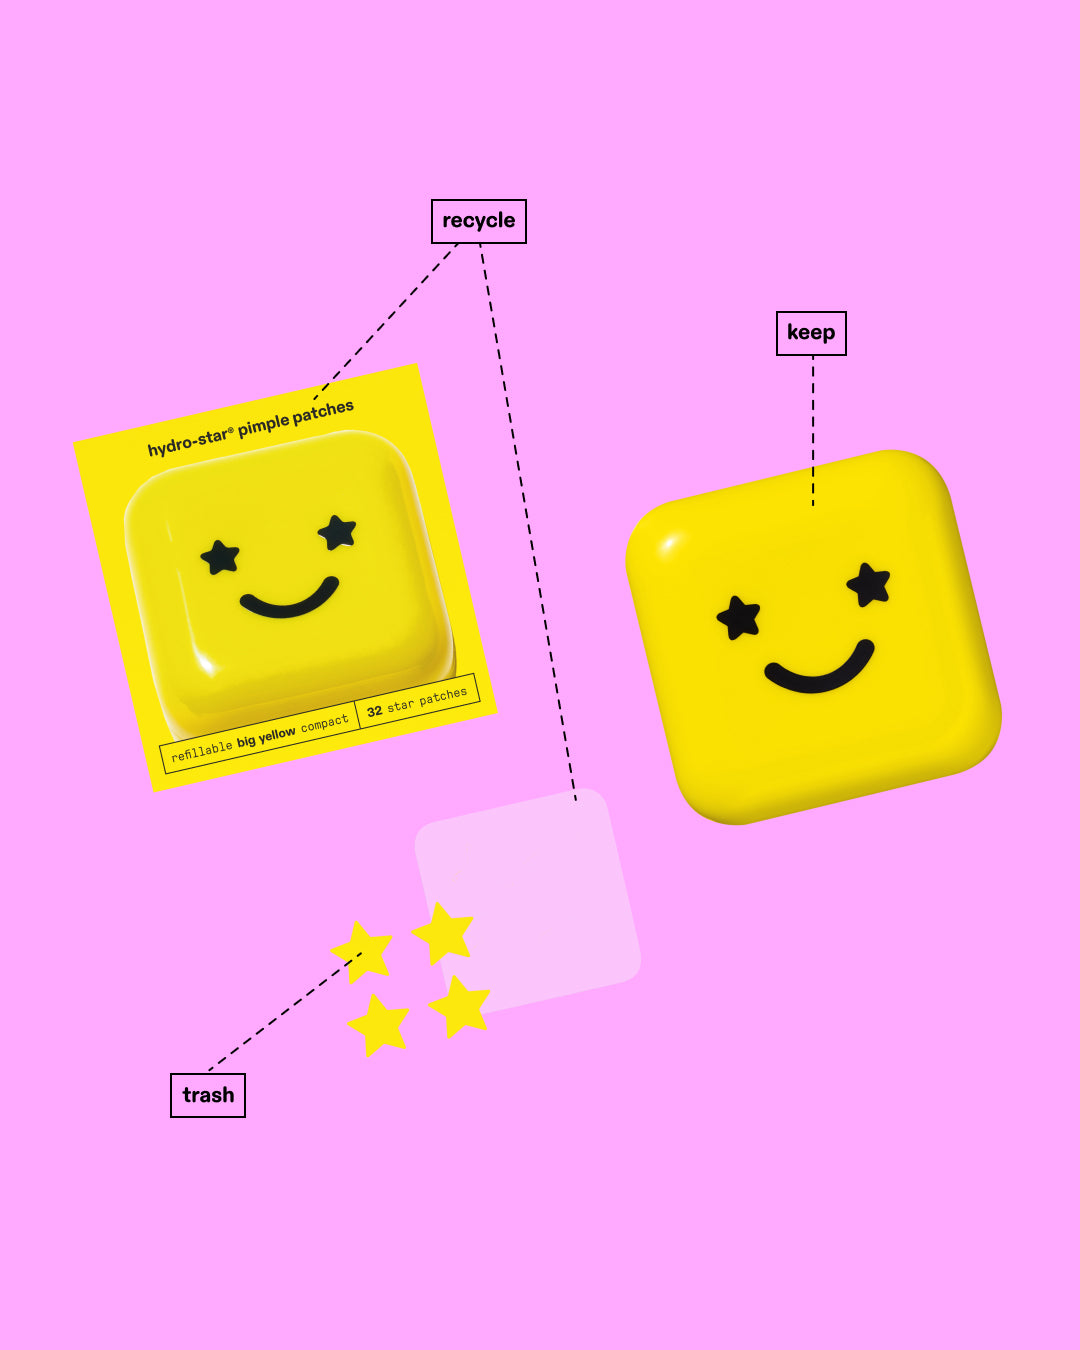 Big Yellow compact and packaging on a pink background. Two lines mark the box and plastic sheets as recyclable, used pimple patches as trash, and case as reusable.